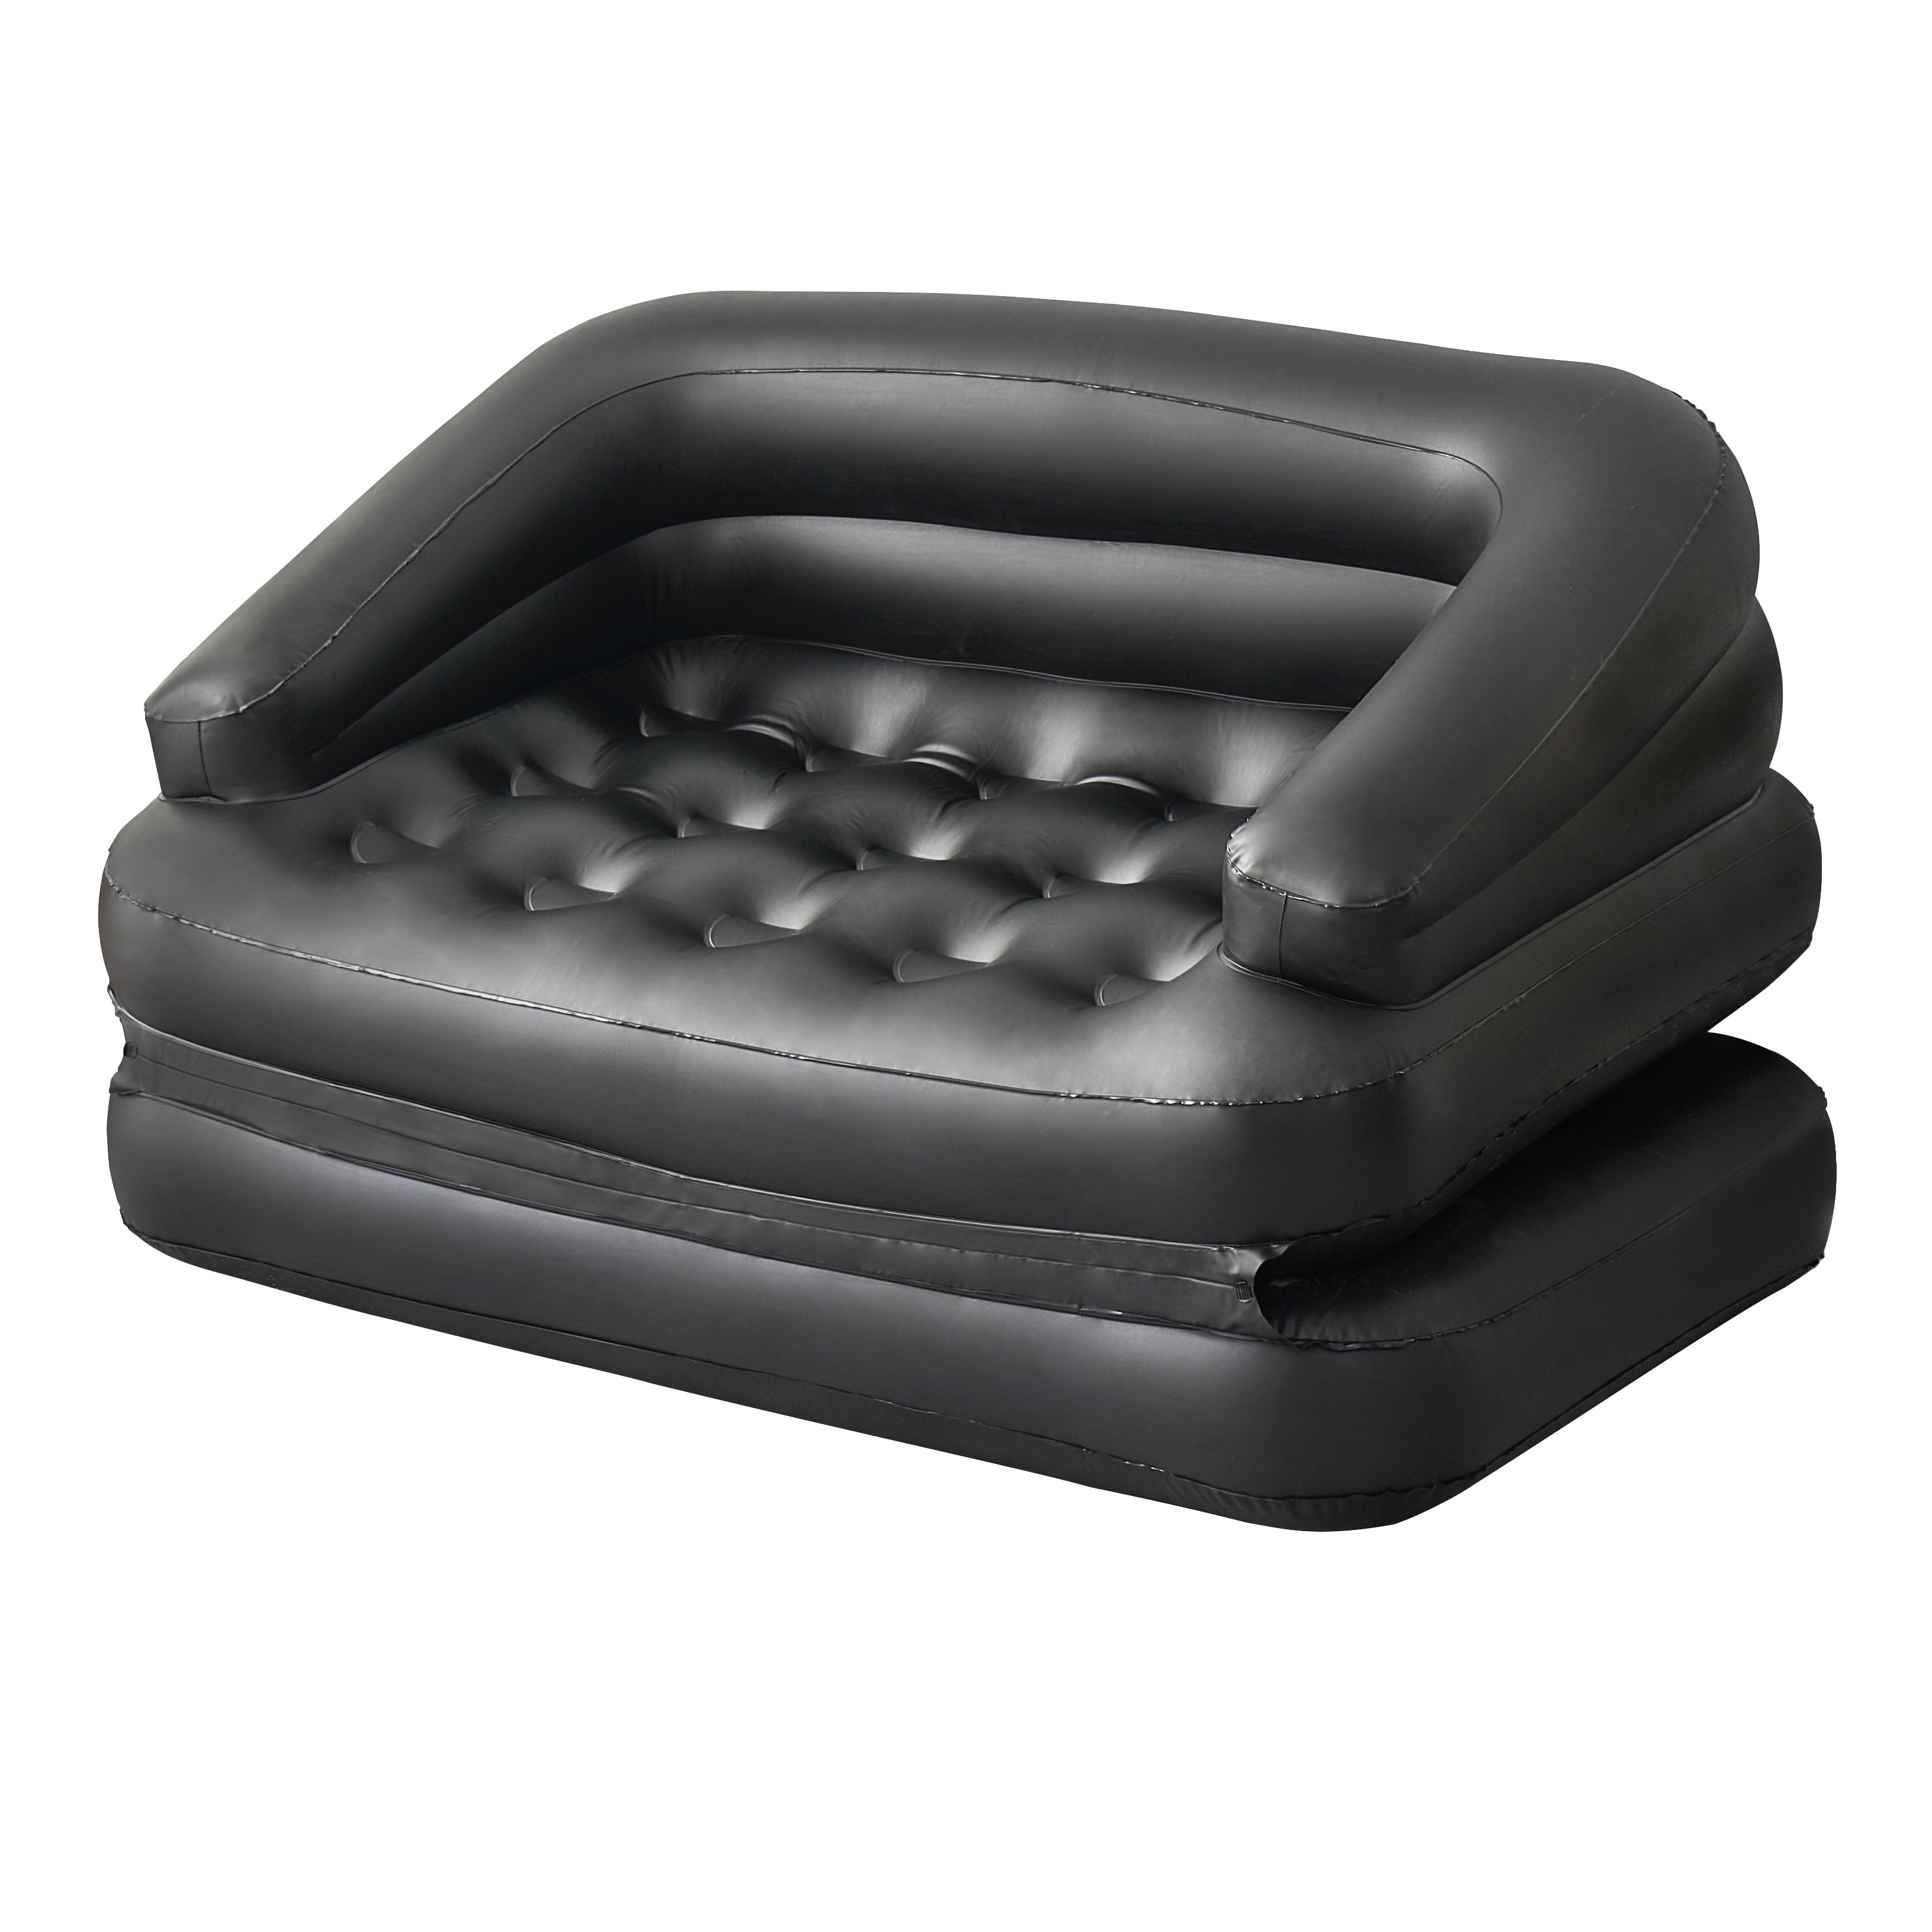 under Pleated June Avenli Inflatable Sofa Bed, Air Mattress, Lounge Chair Couch for Camping,  5-in-1, Full, Black - Walmart.com